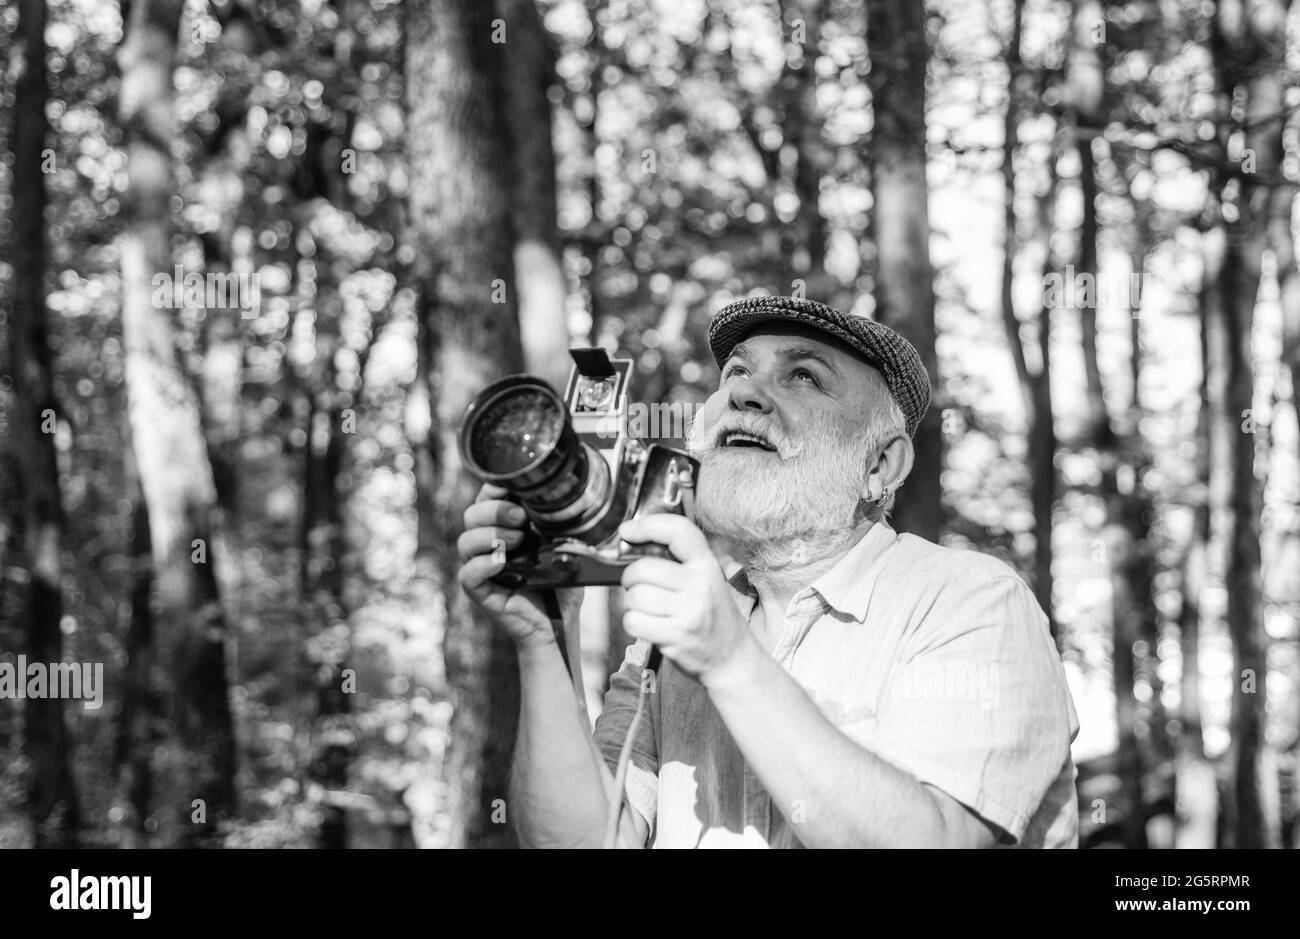 Retro Camera. Capture the moment. Pension and retirement. Vintage stylized photo of man photographer with old Camera. autumn nature background. Smile Stock Photo